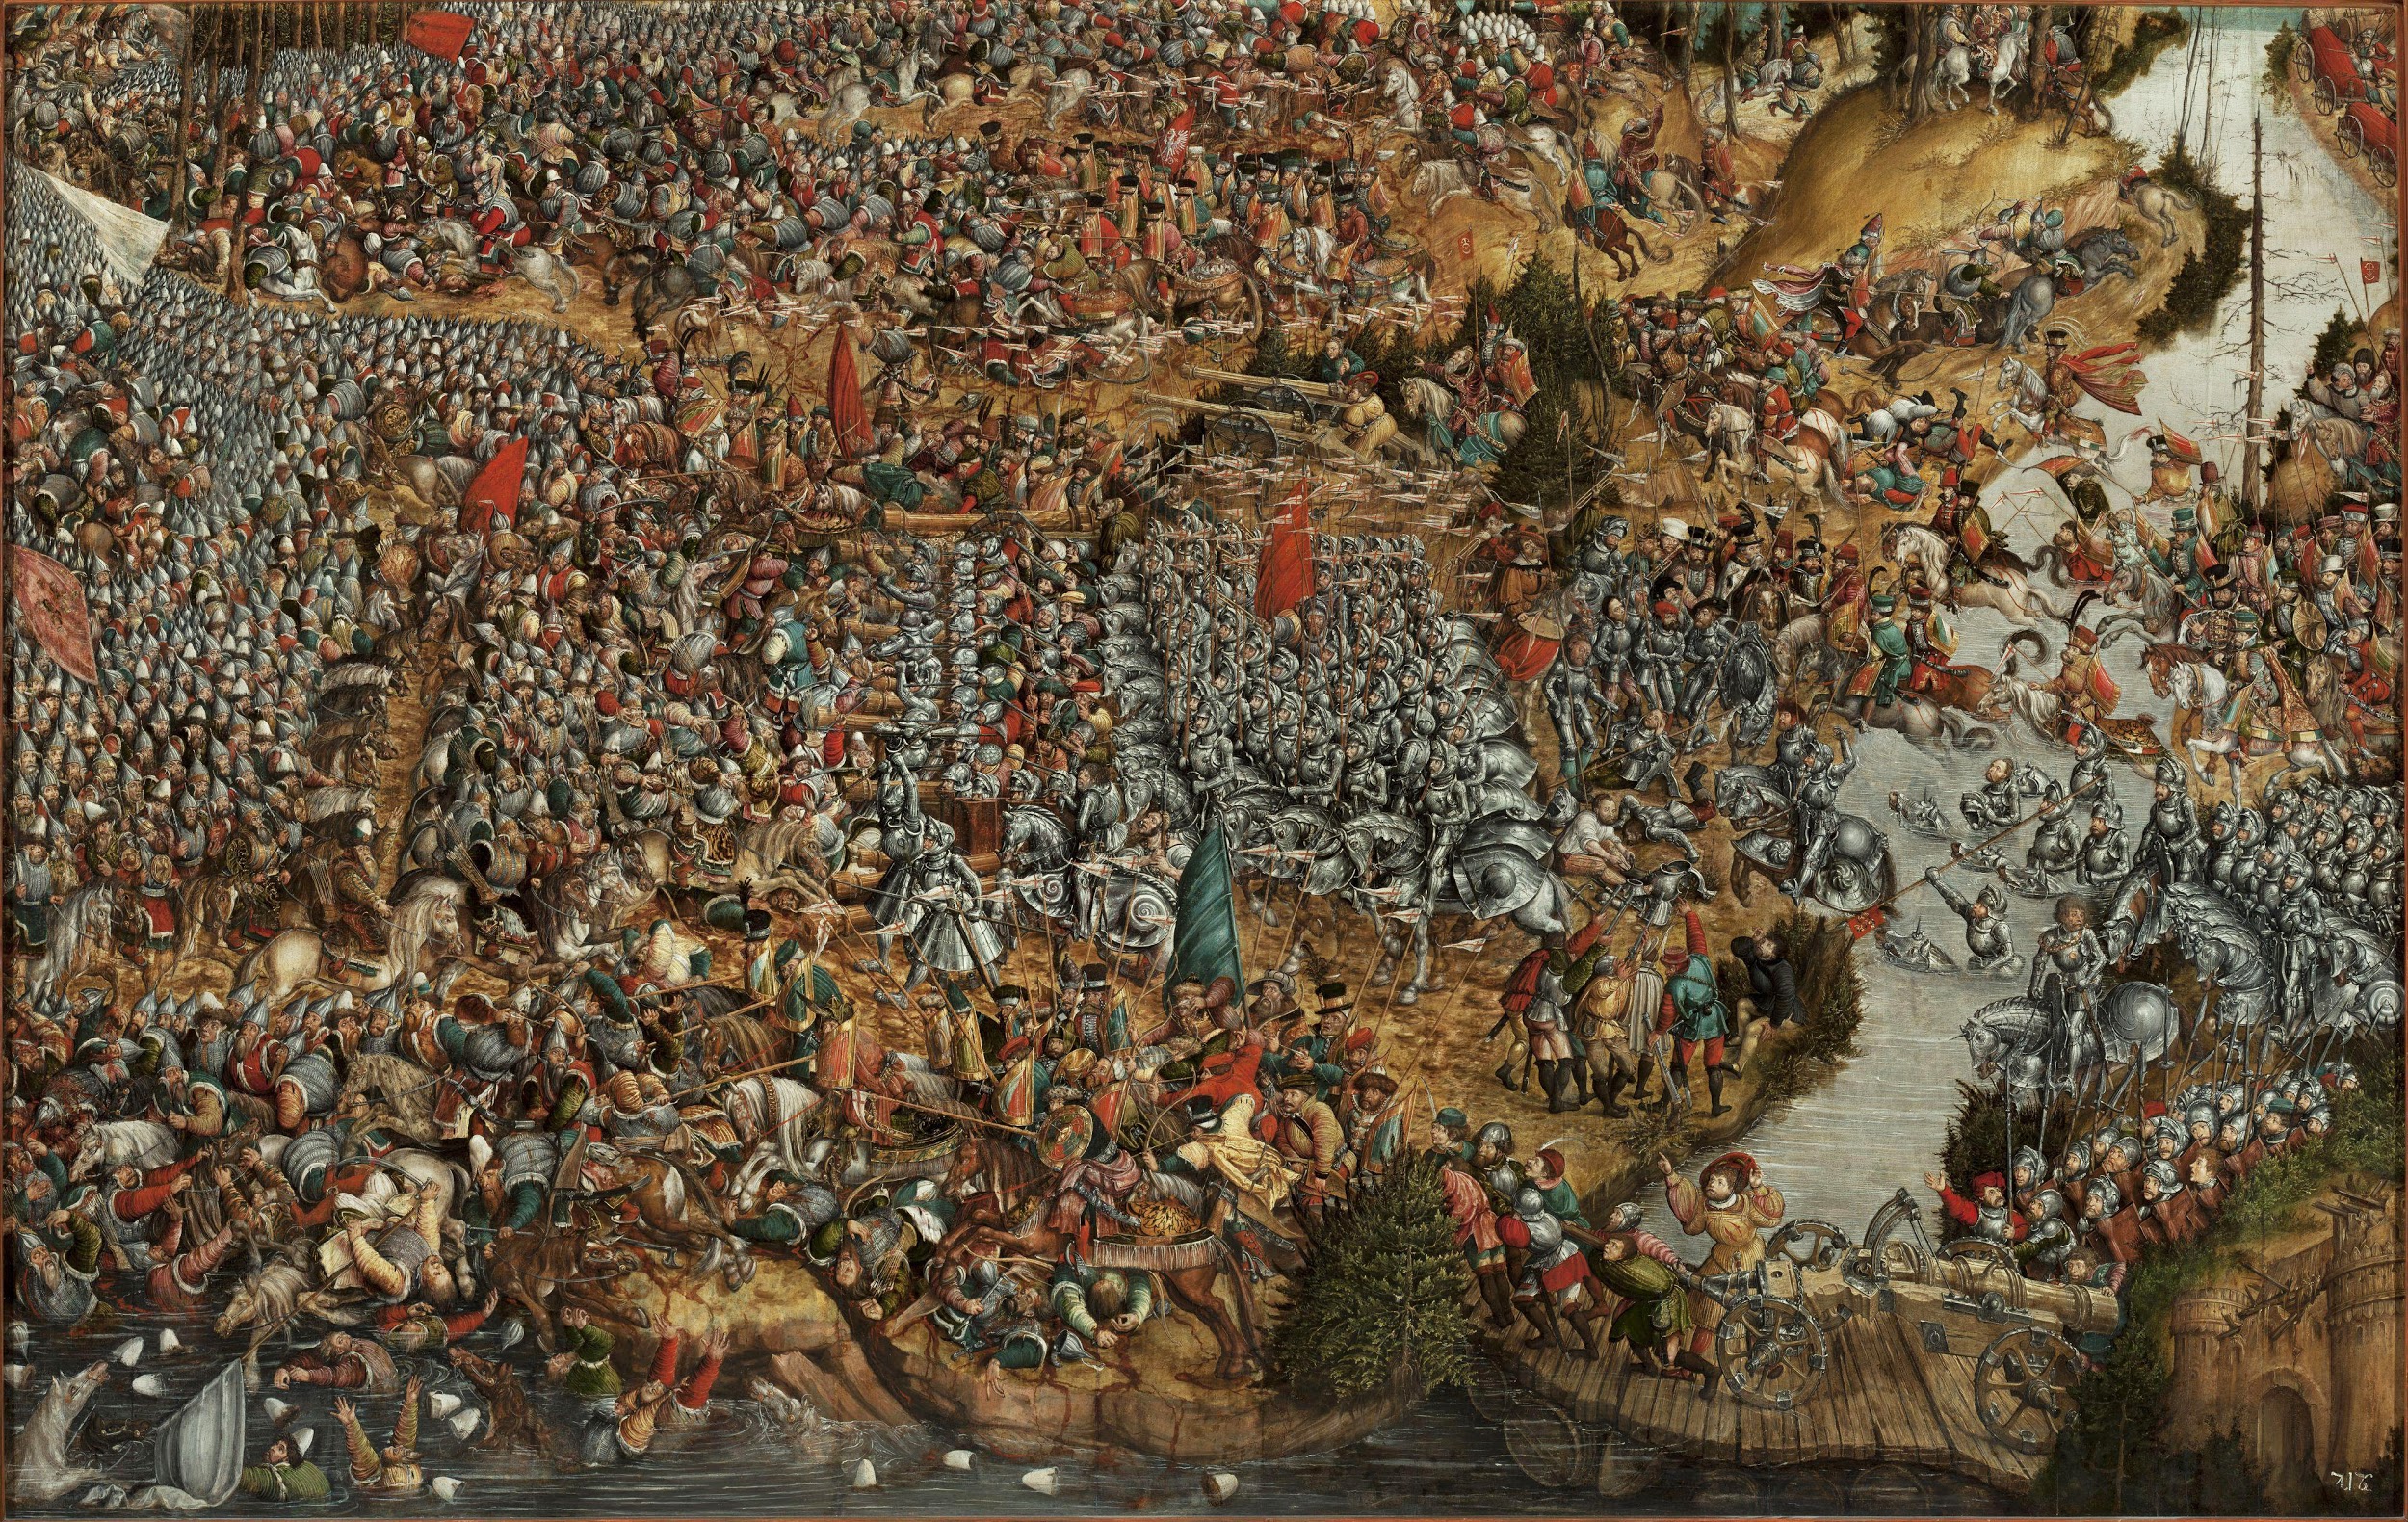 The Battle of Orsha, created in the circle of Lucas Cranach the Elder, Hans Krell (?), (c. 1490–1565), is the earliest Renaissance battle image associated with the Polish patronage and preserved in Polish collections. The painting depicts one of the greatest armed clashes in 16th-century Europe, fought on 8 September 1514, which was the culmination of the ten-year war between Poland and the Grand Duchy of Moscow. ~